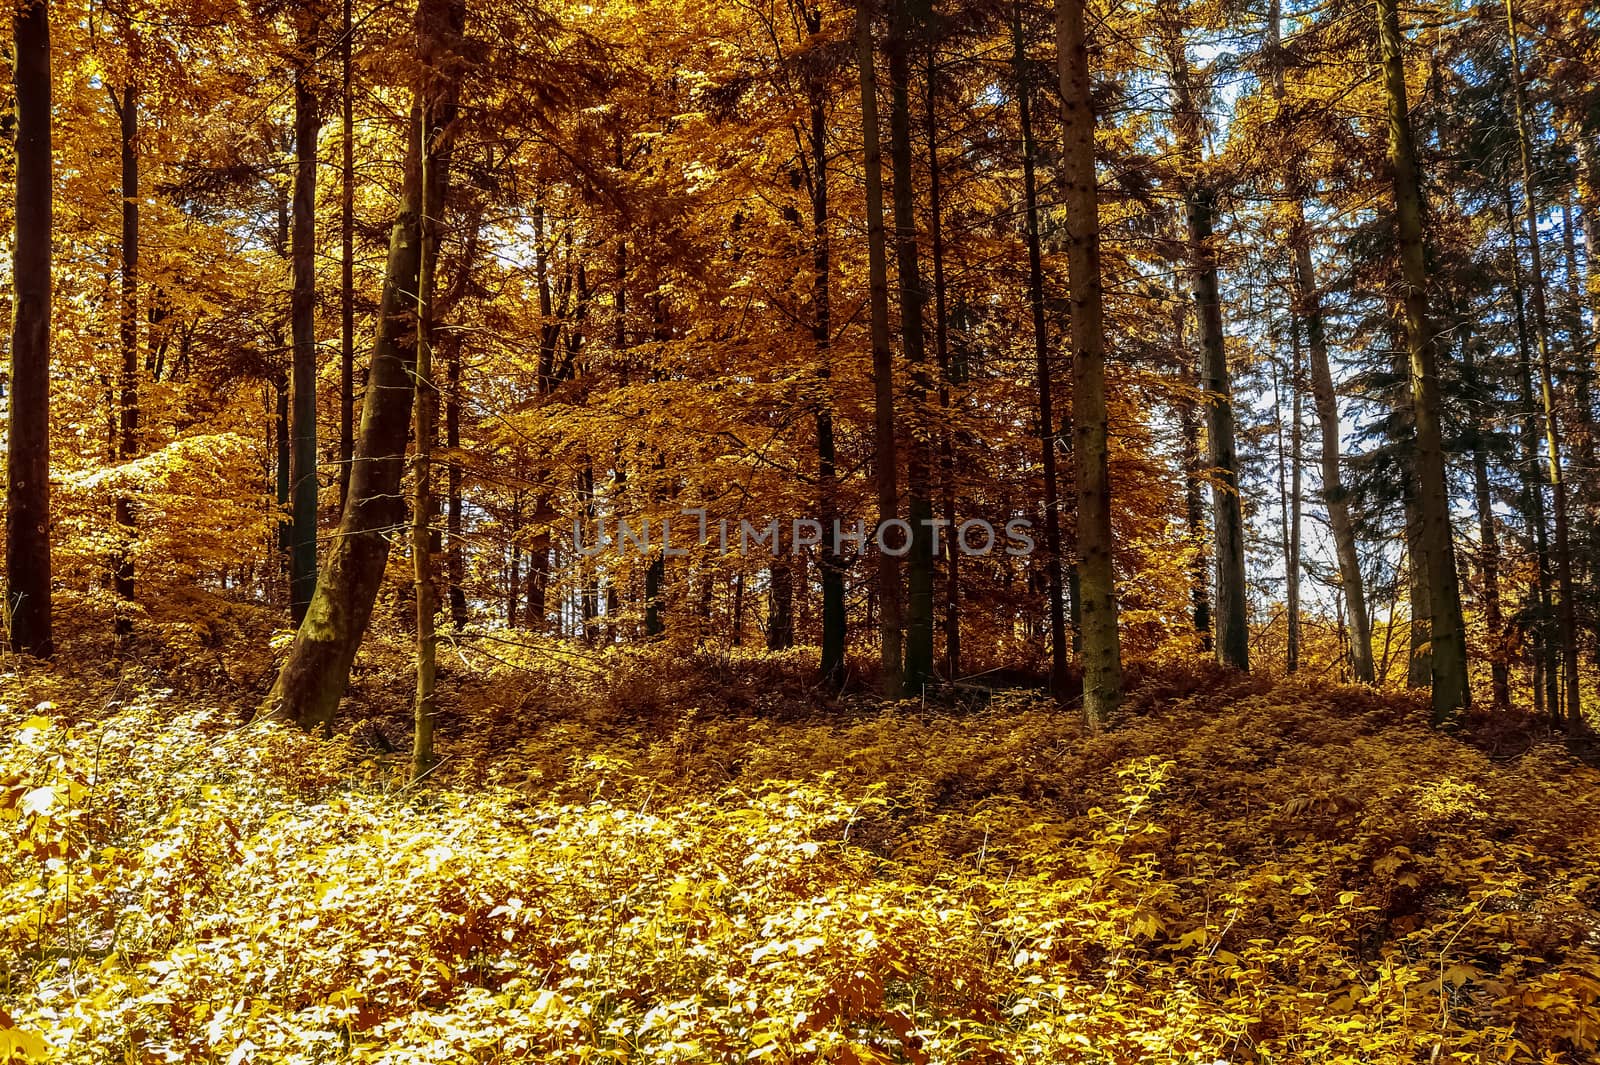 Beautiful panorama view on a golden autumn landscape found in eu by MP_foto71